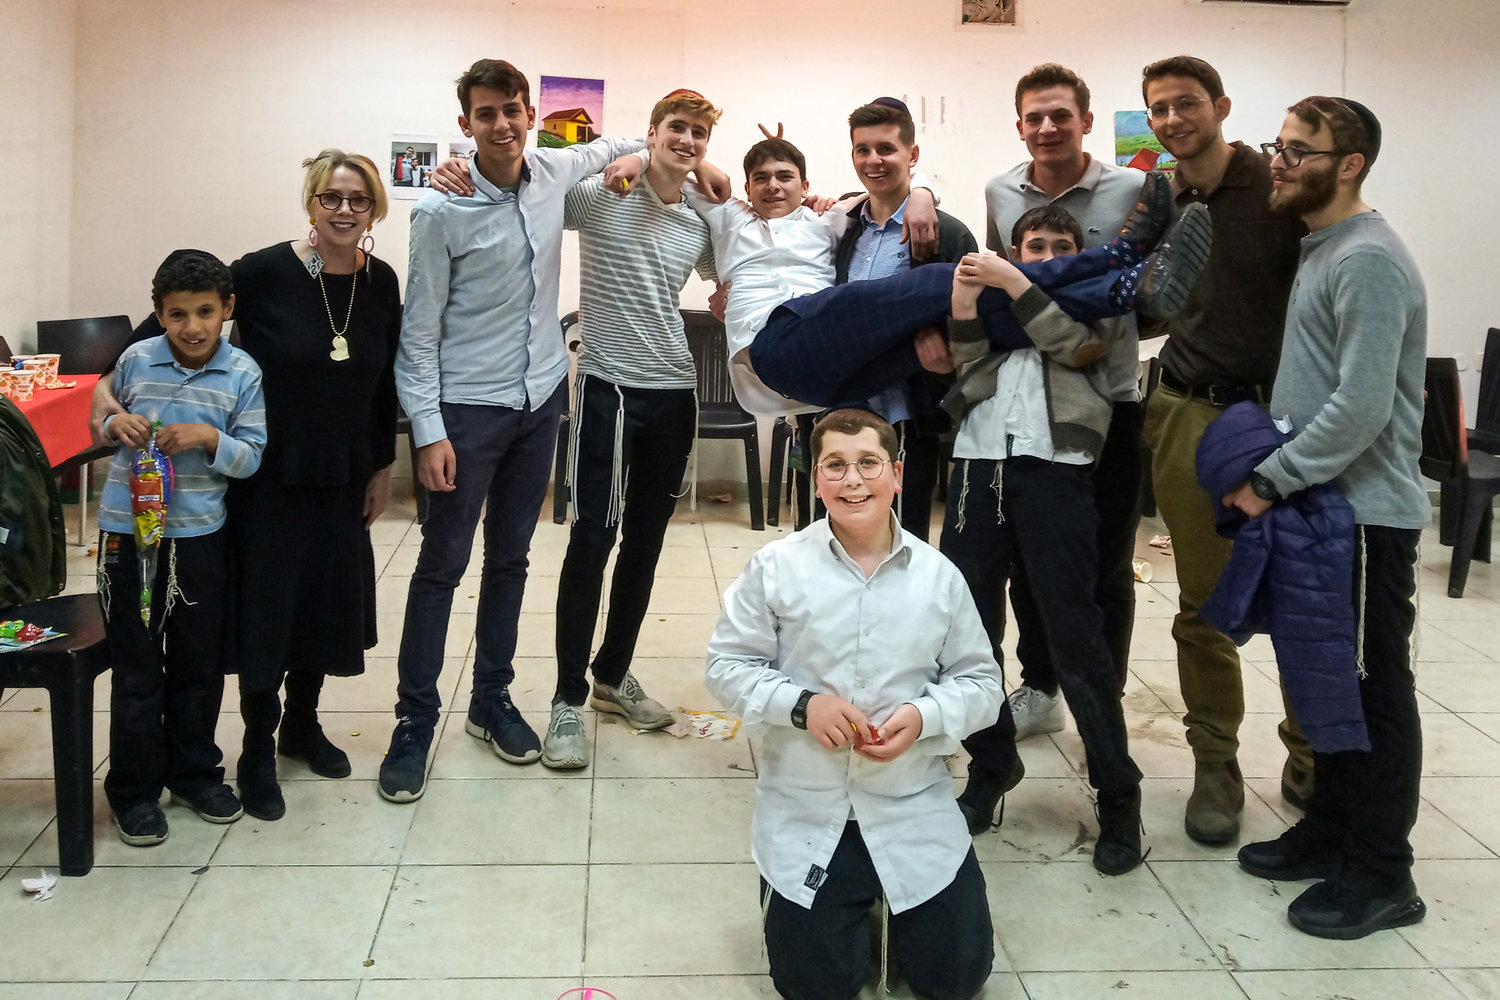 Before the coronavirus pandemic, students from Yeshiva Aish HaTorah’s Aish Gesher visited the Sanhedria Children’s Home in Israel, for an annual Hanukkah party. One of the students in the program, Avi Kroll, was there in 2019, but saddened when the party was canceled in 2020 because of the pandemic.